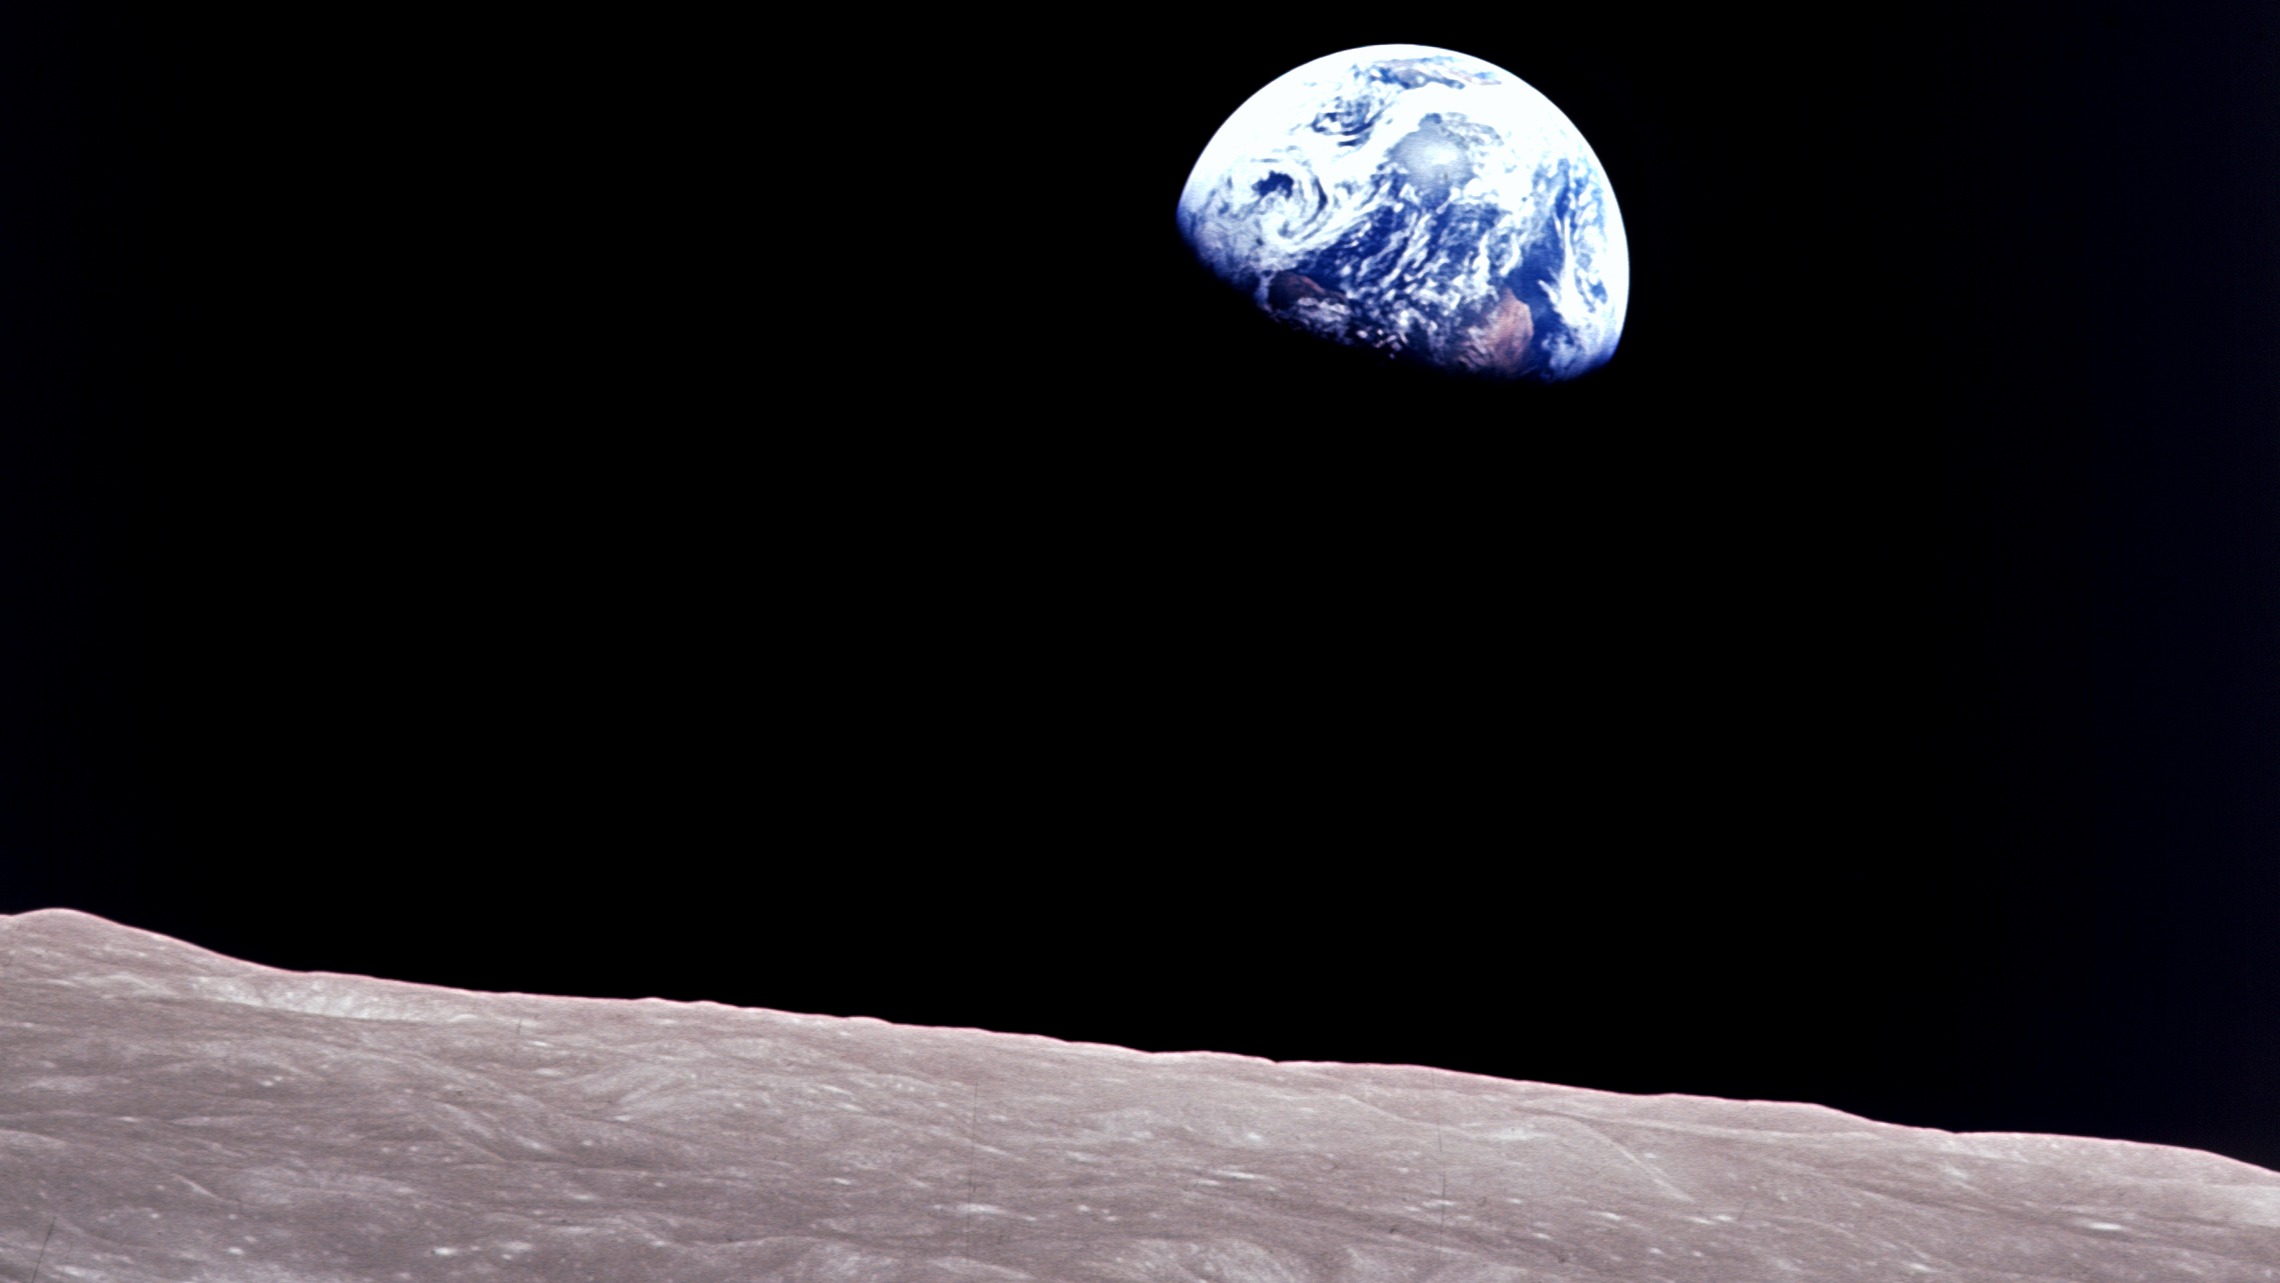 NASA Apollo 8 astronaut Bill Anders captured one of the first